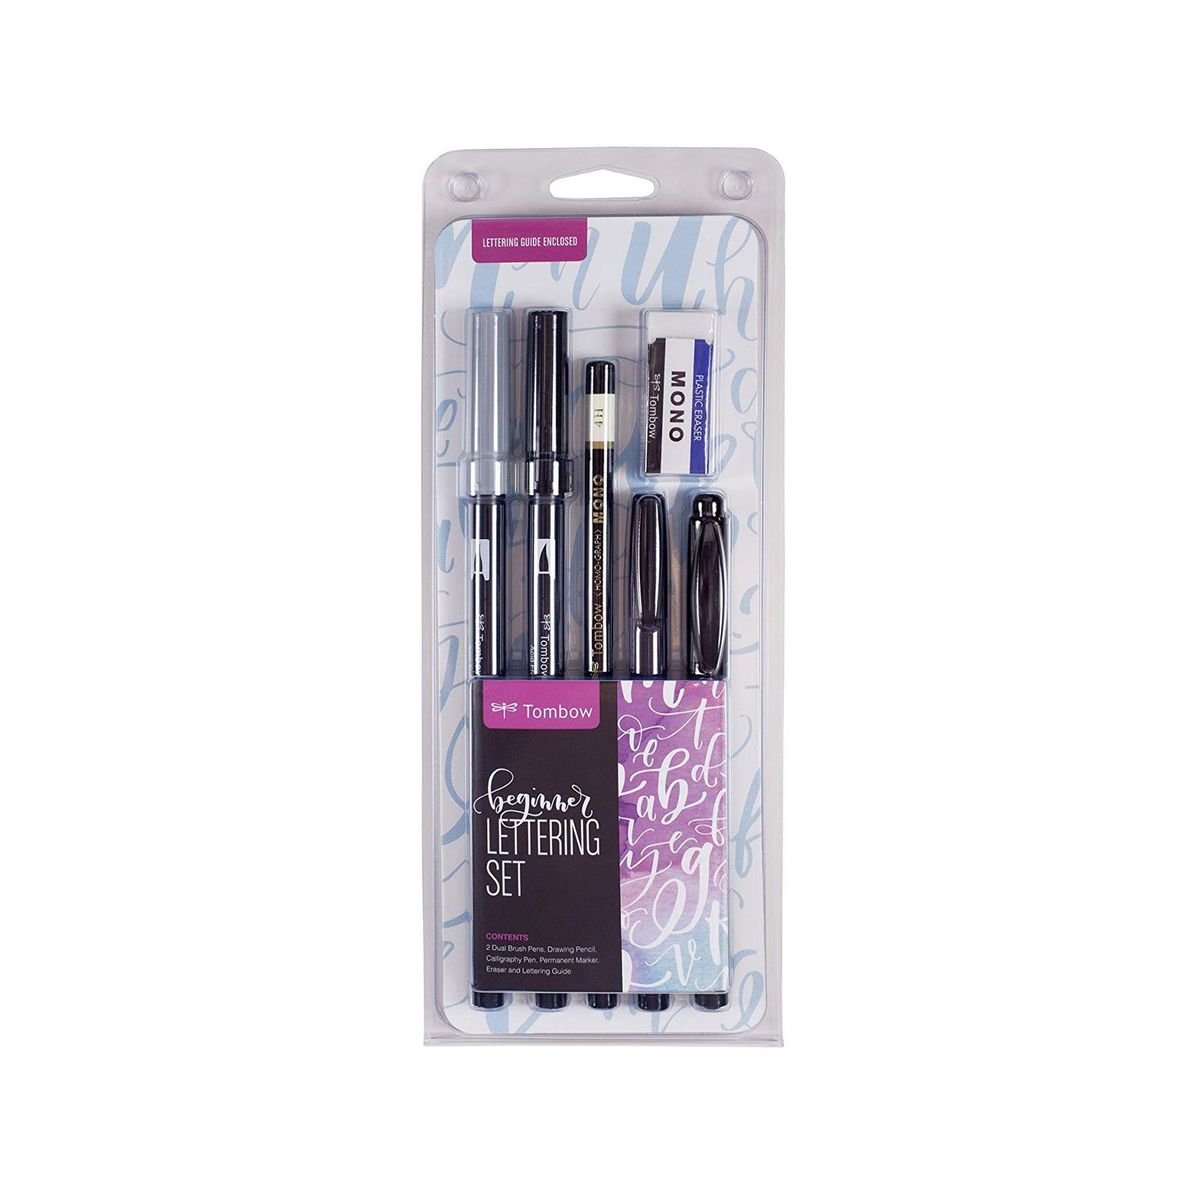 Kit Lettering Tombow C/ 6 Unidades